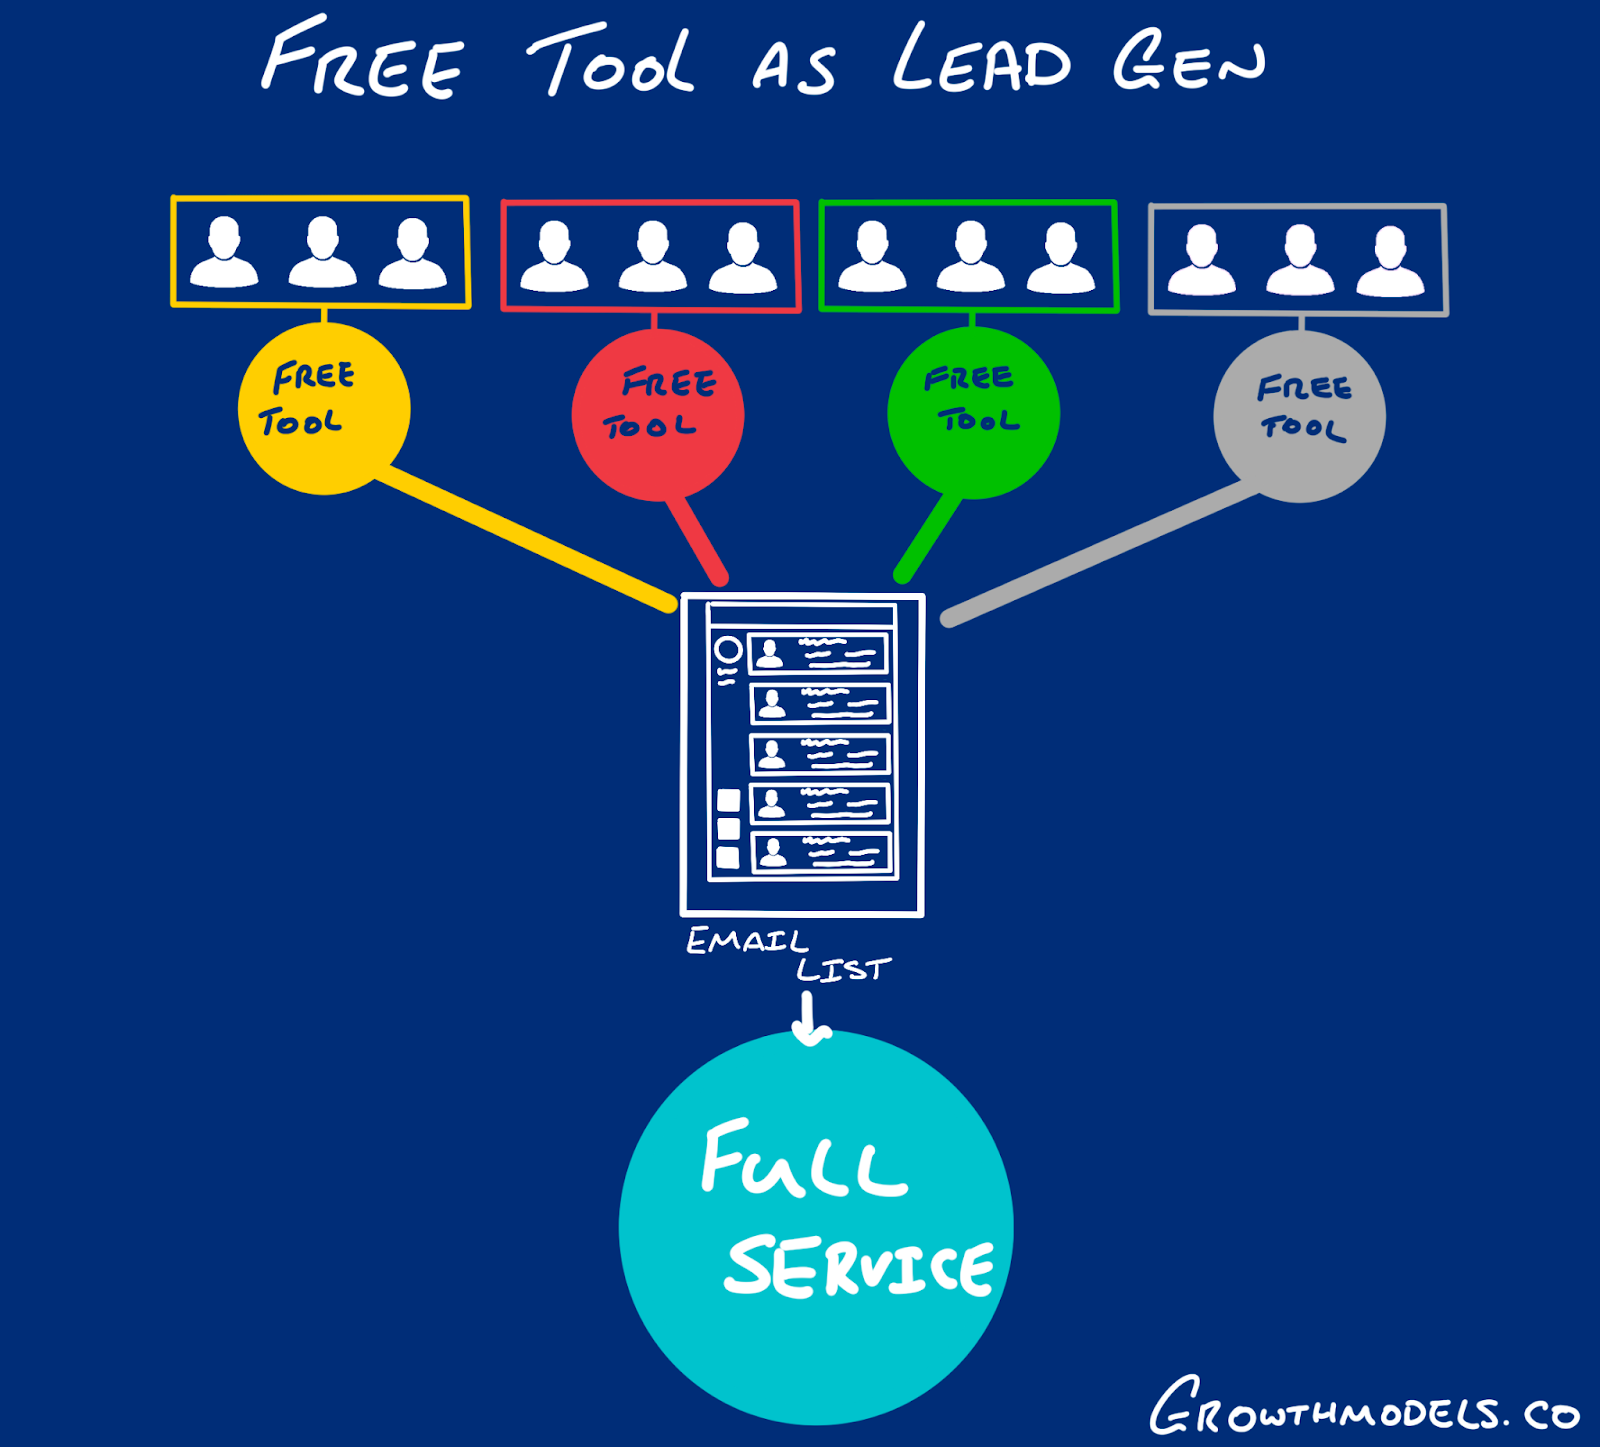 Free tools for marketing and lead acquisition